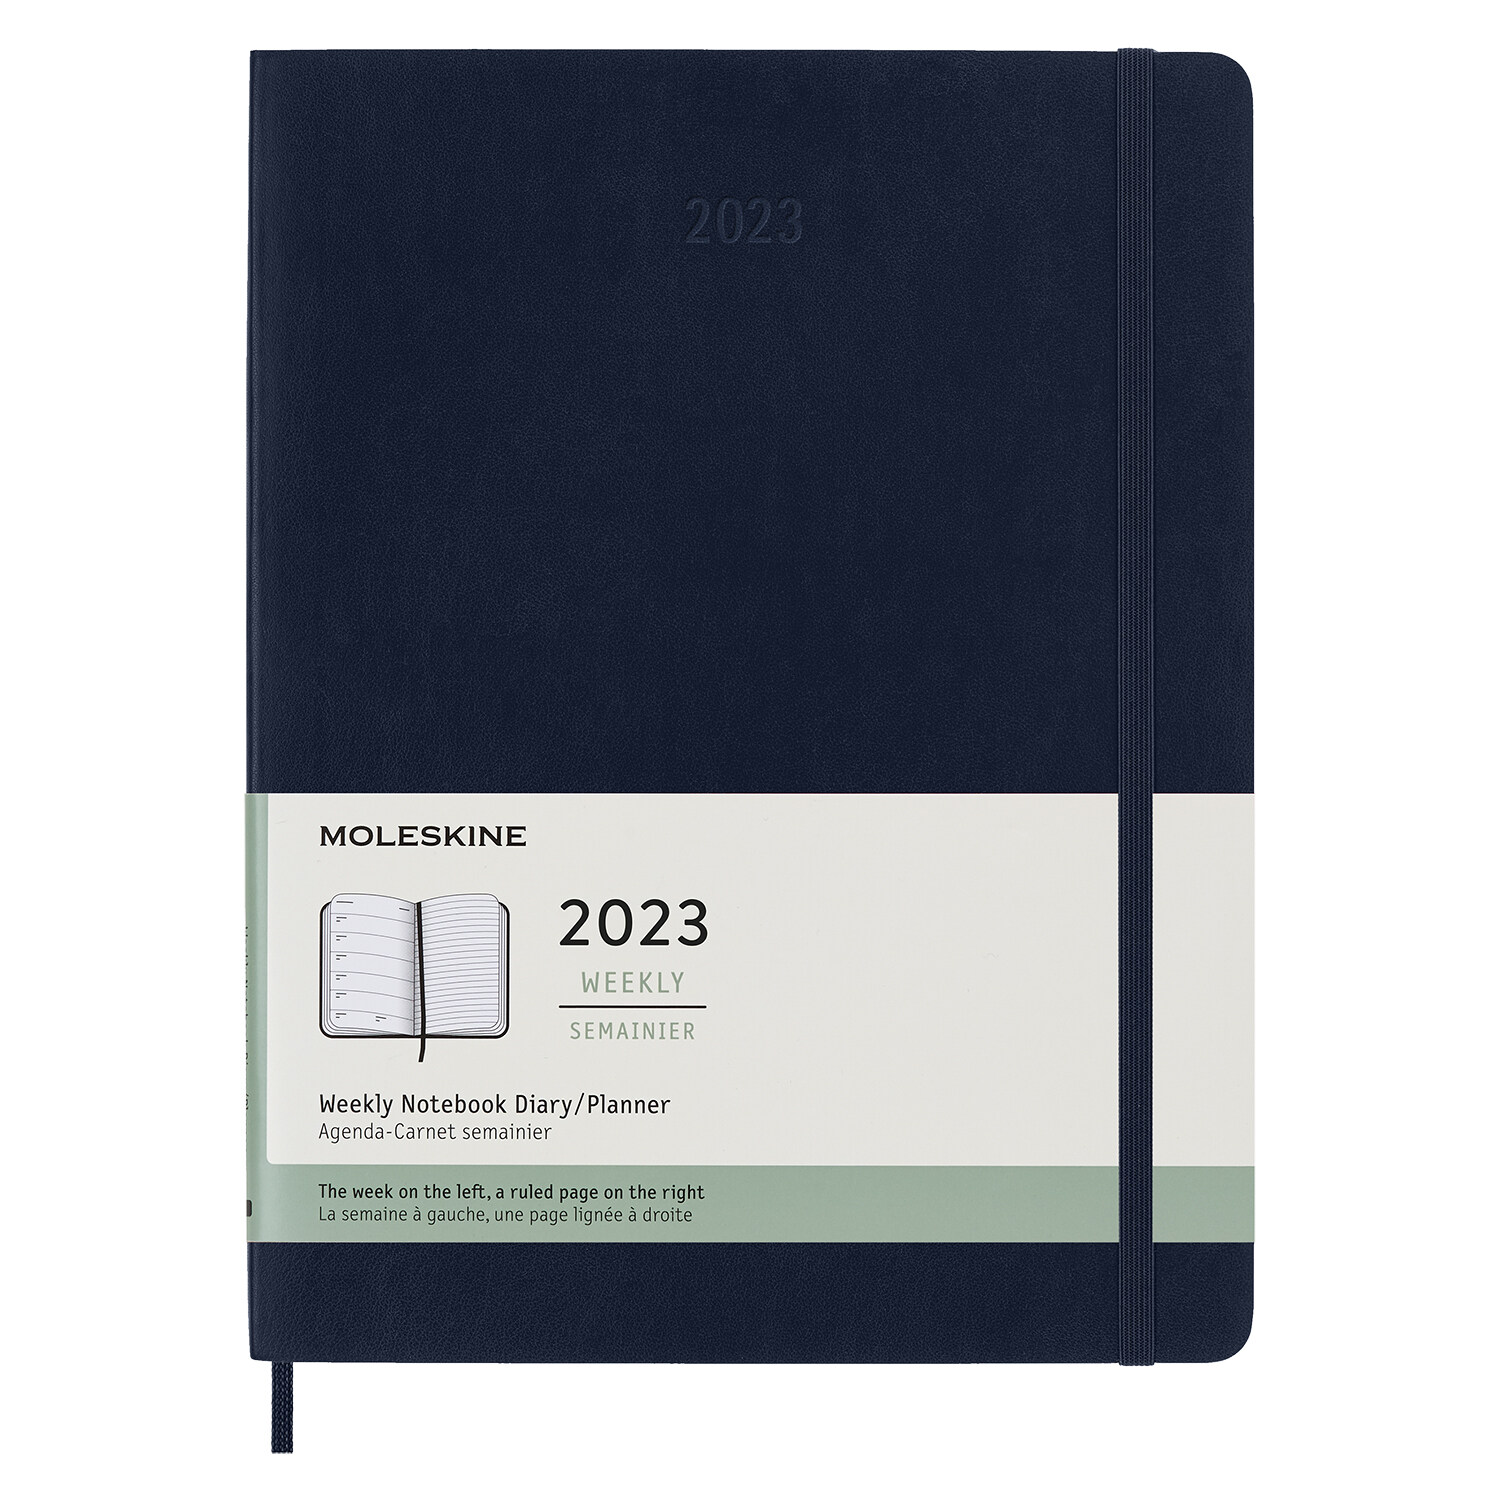 Moleskine 2023 Weekly Notebook Planner, 12m, Extra Large, Saphire Blue, Soft Cover (7.5 X 10) (Other)